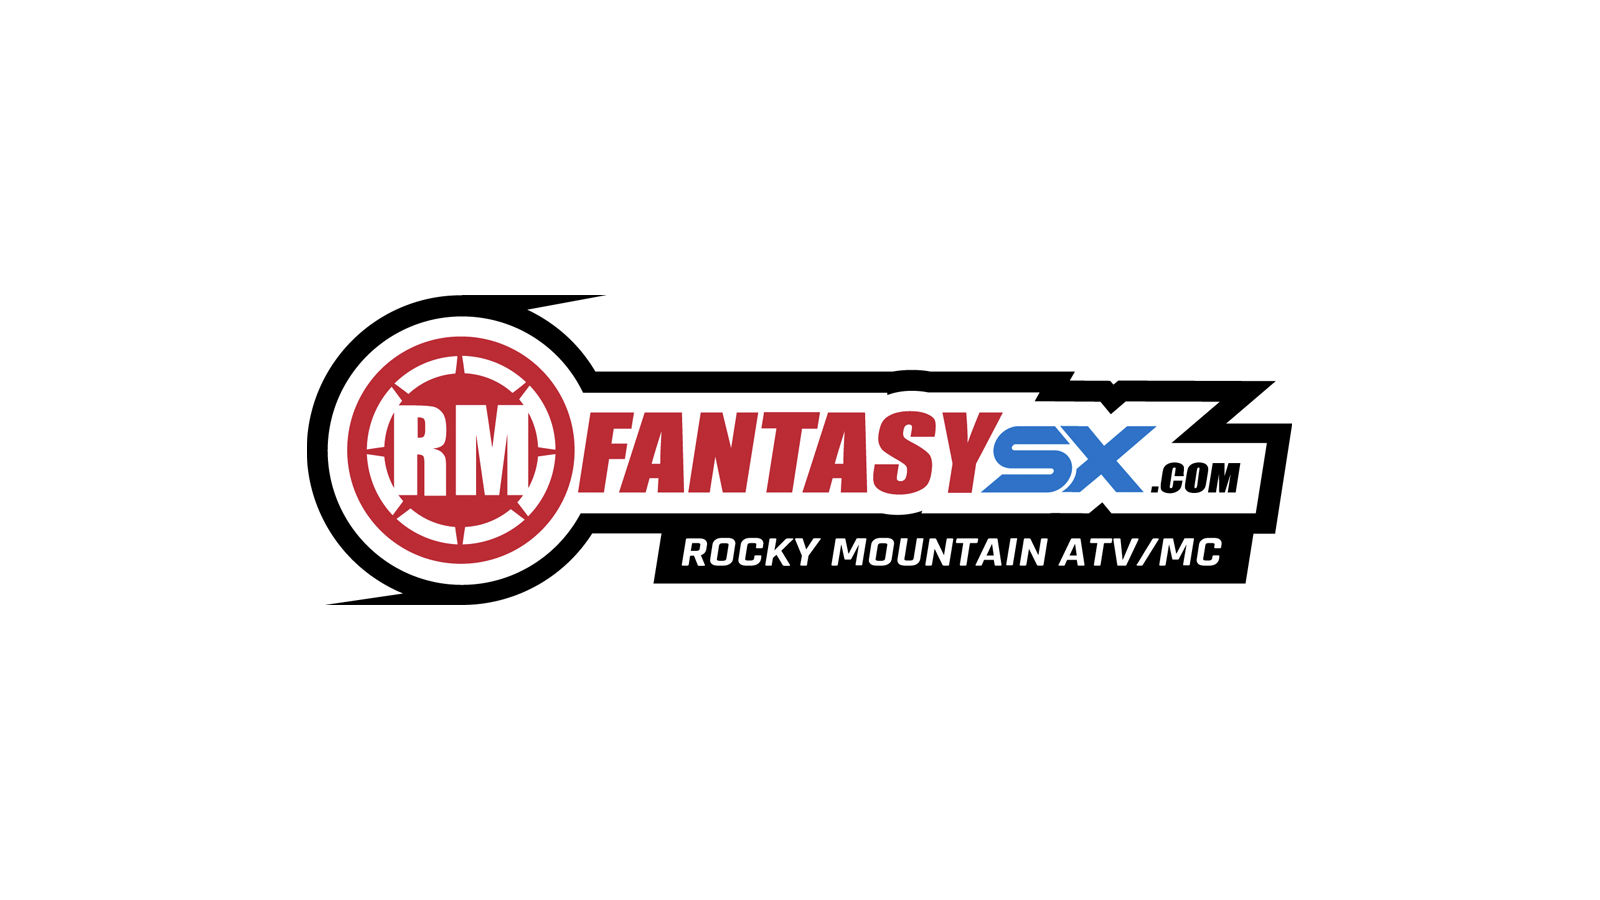 Rocky Mountain Fantasy SX group creation and picks are open now. This is the official Fantasy game for Supercross. With over $100,000 dollars in prices, ten prizes for overall season point winners and 100 prizes each week, this is something every Supercross fan should play.